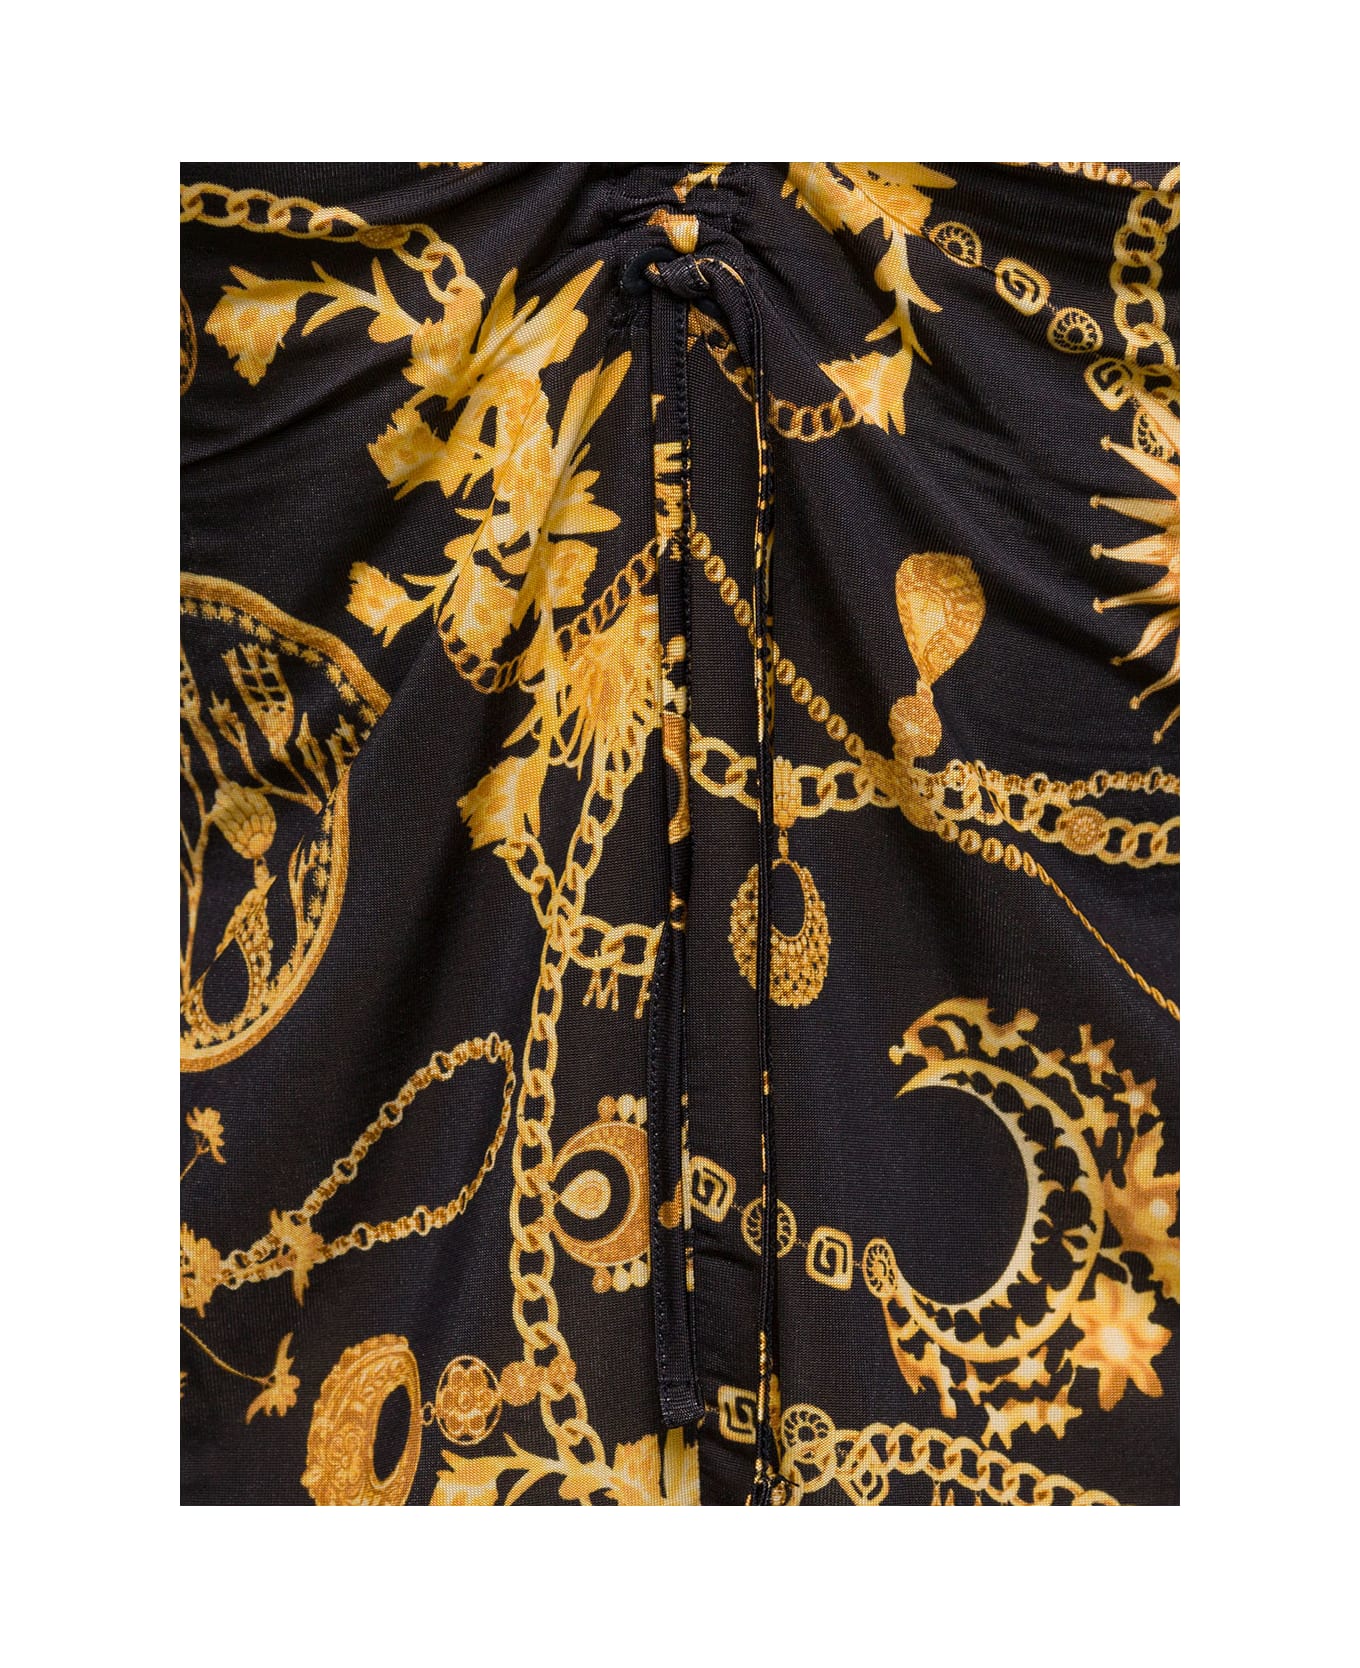 Marine Serre Black Blouse With All-over Graphic Print And Gathering Detail In Stretch Viscose Woman - Black